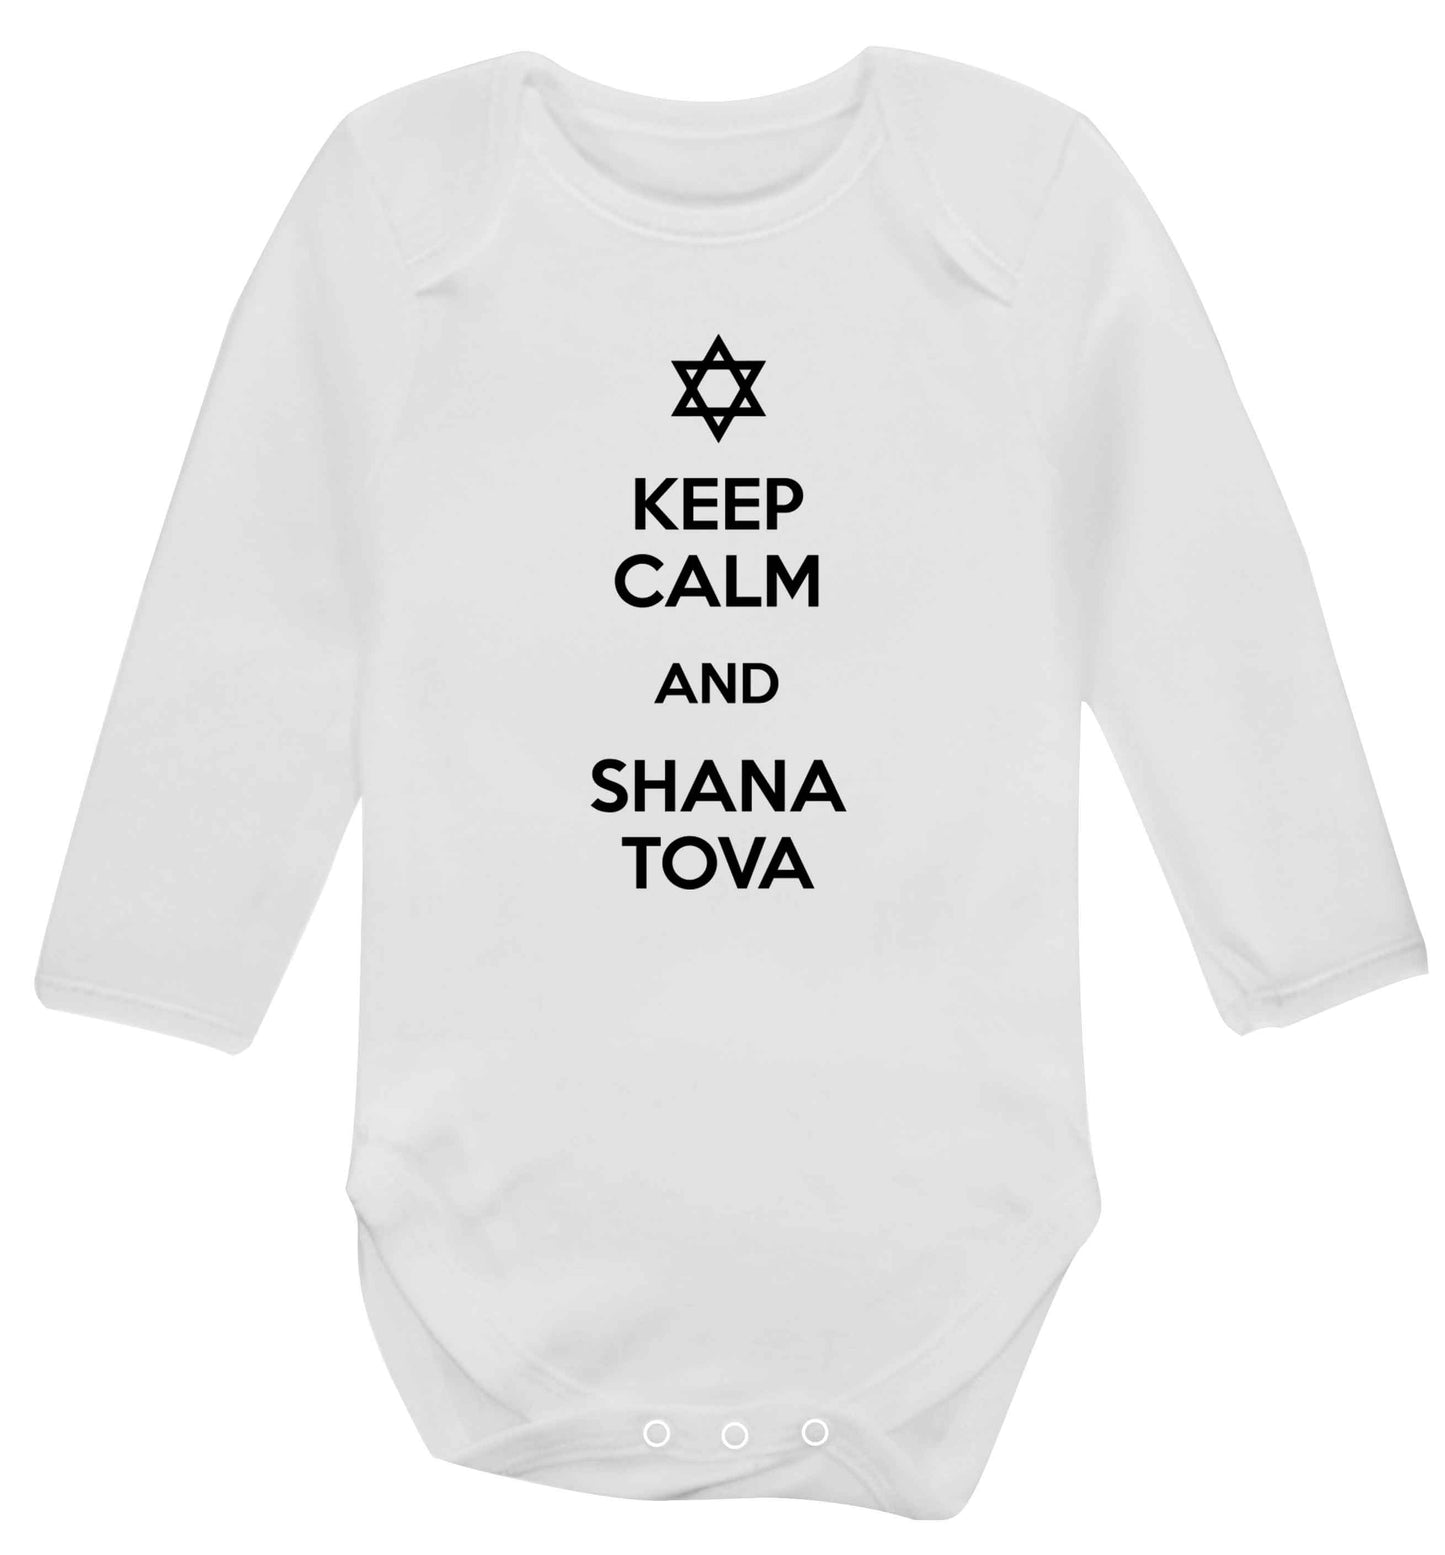 Keep calm and shana tova Baby Vest long sleeved white 6-12 months